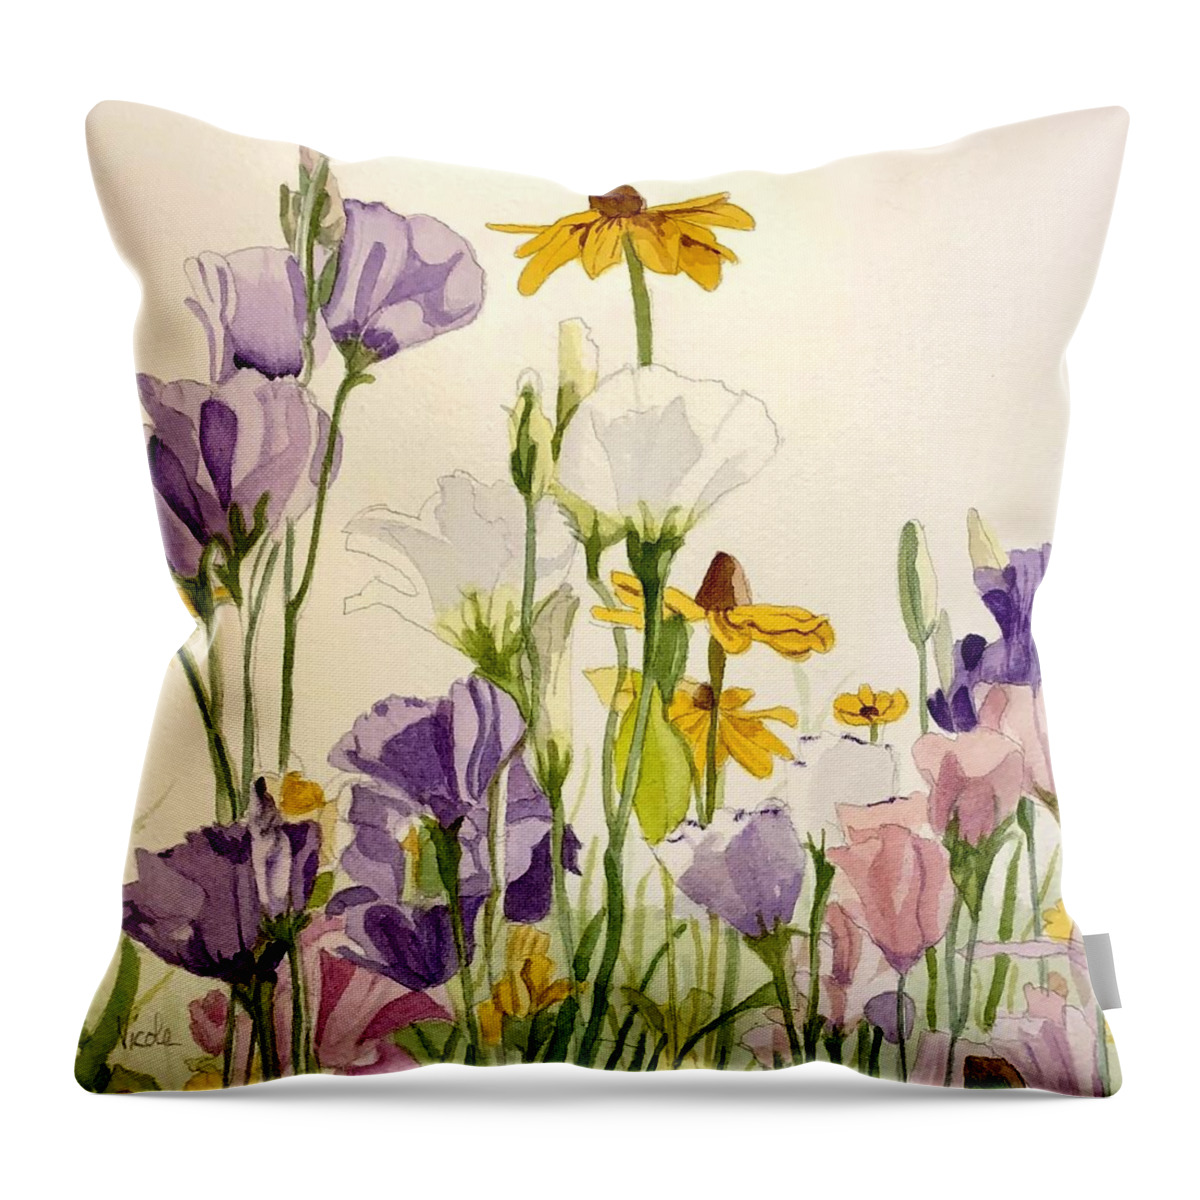 Lisianthus Throw Pillow featuring the painting Wild flowers by Nicole Curreri